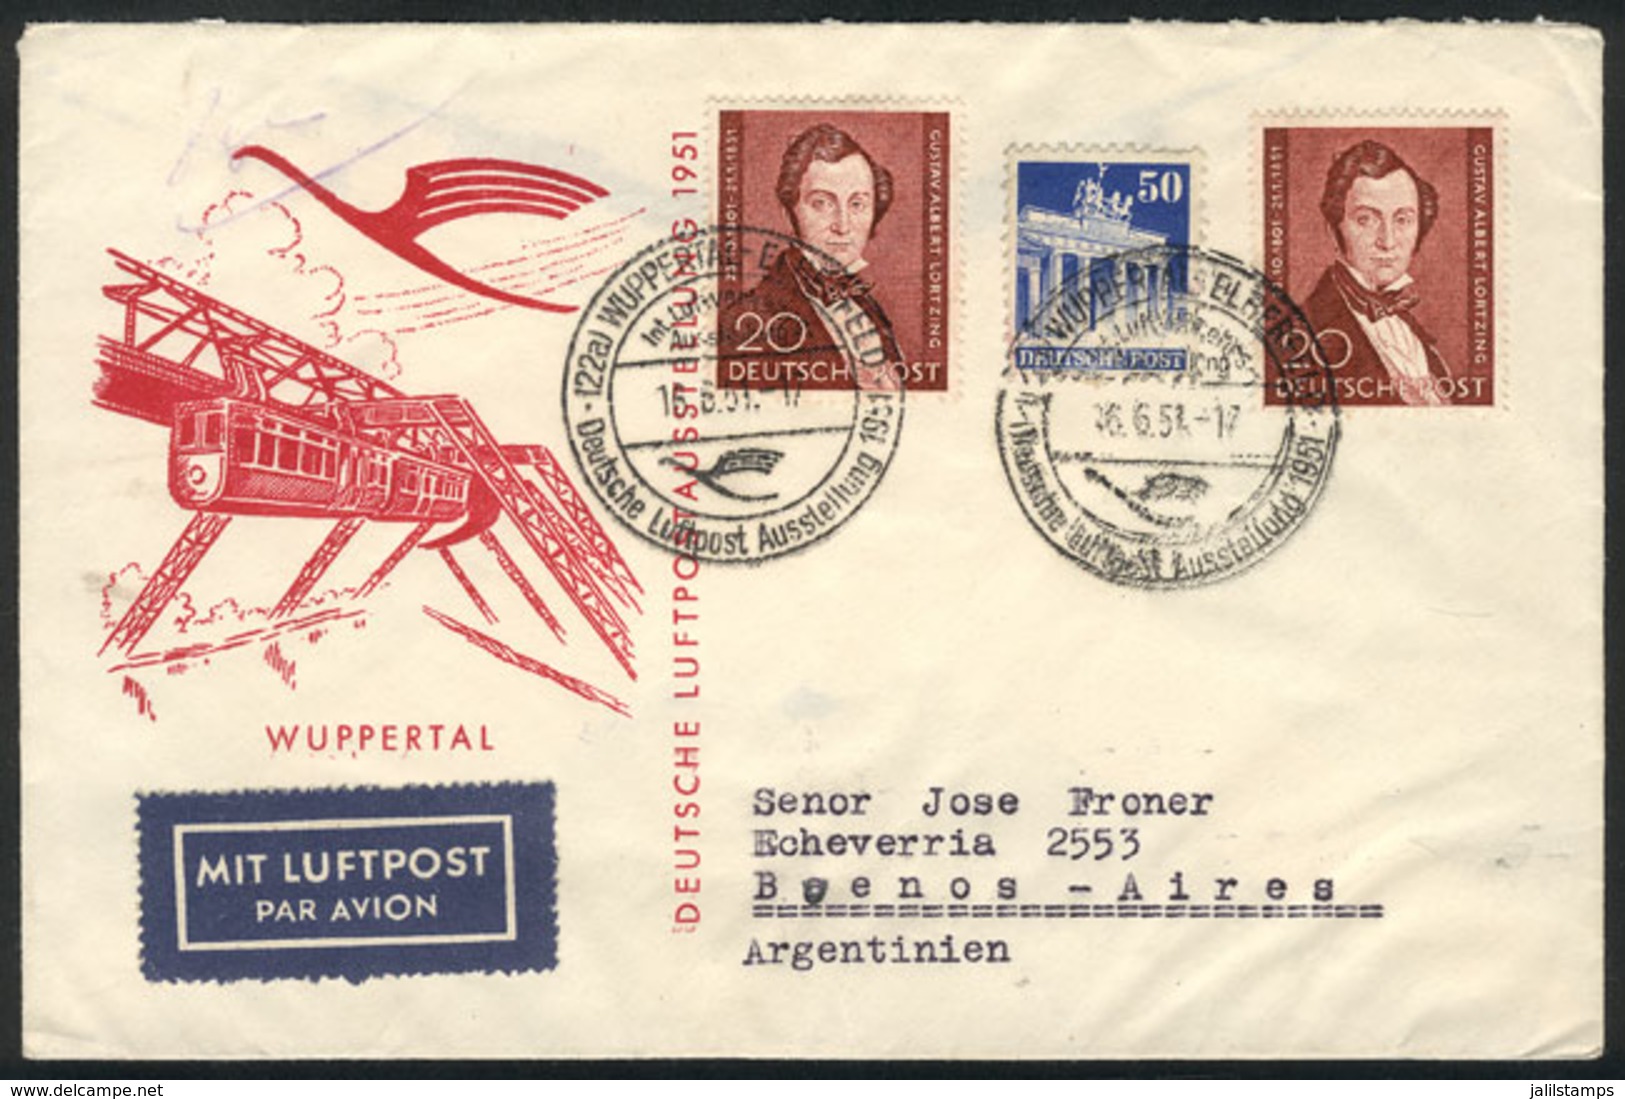 WEST GERMANY: Airmail Cover Sent To Argentina On 16/JUN/1951 With Very Good Postage, Excellent Quality! - Brieven En Documenten